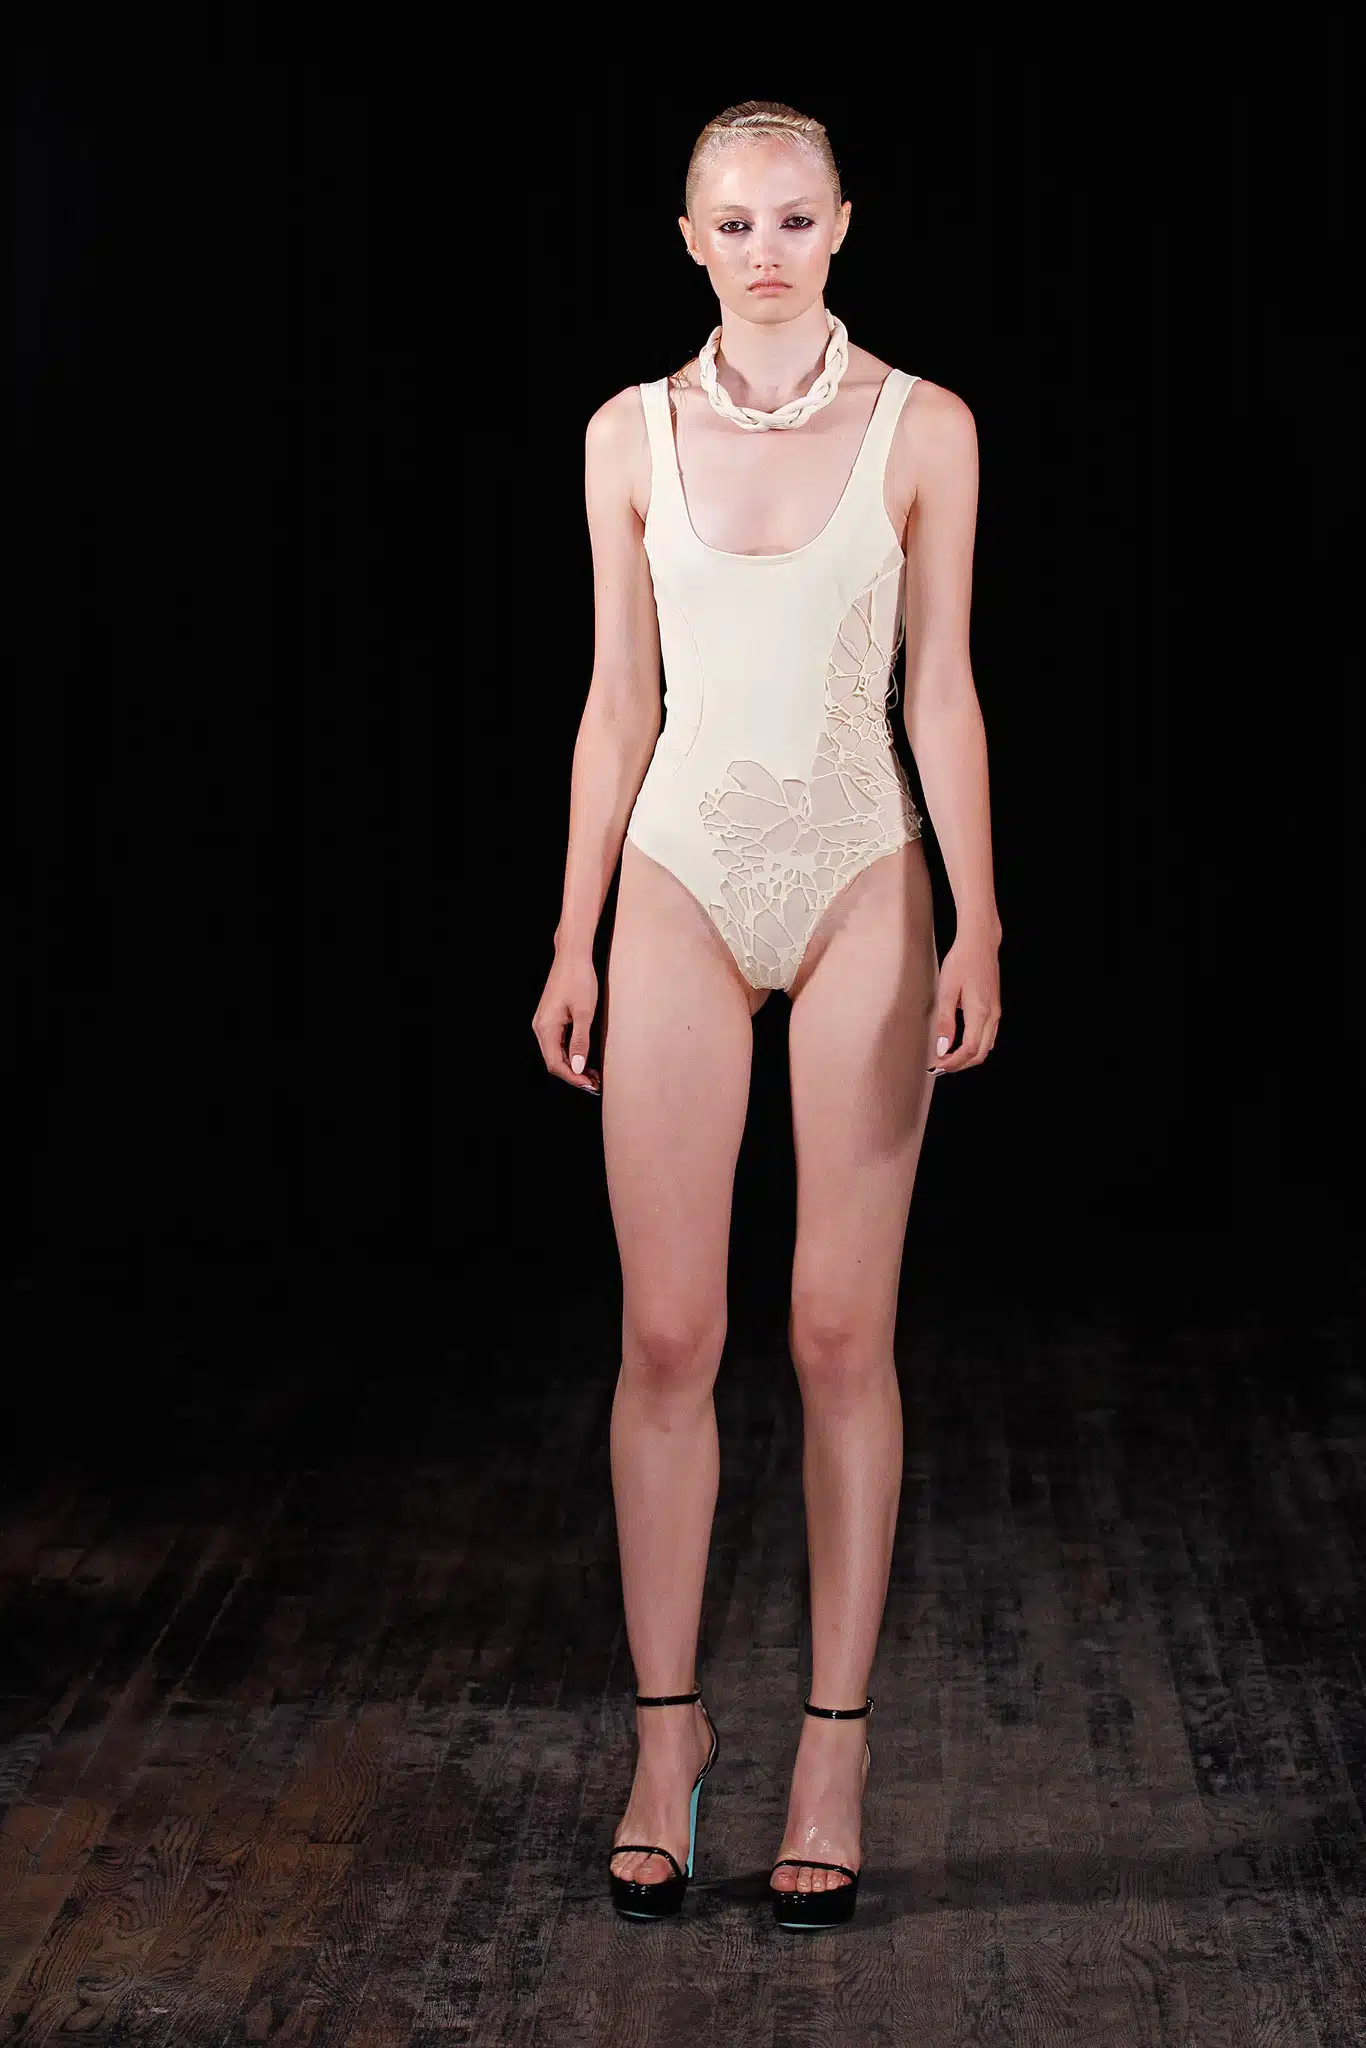 Image from SS14 SHOW Collection